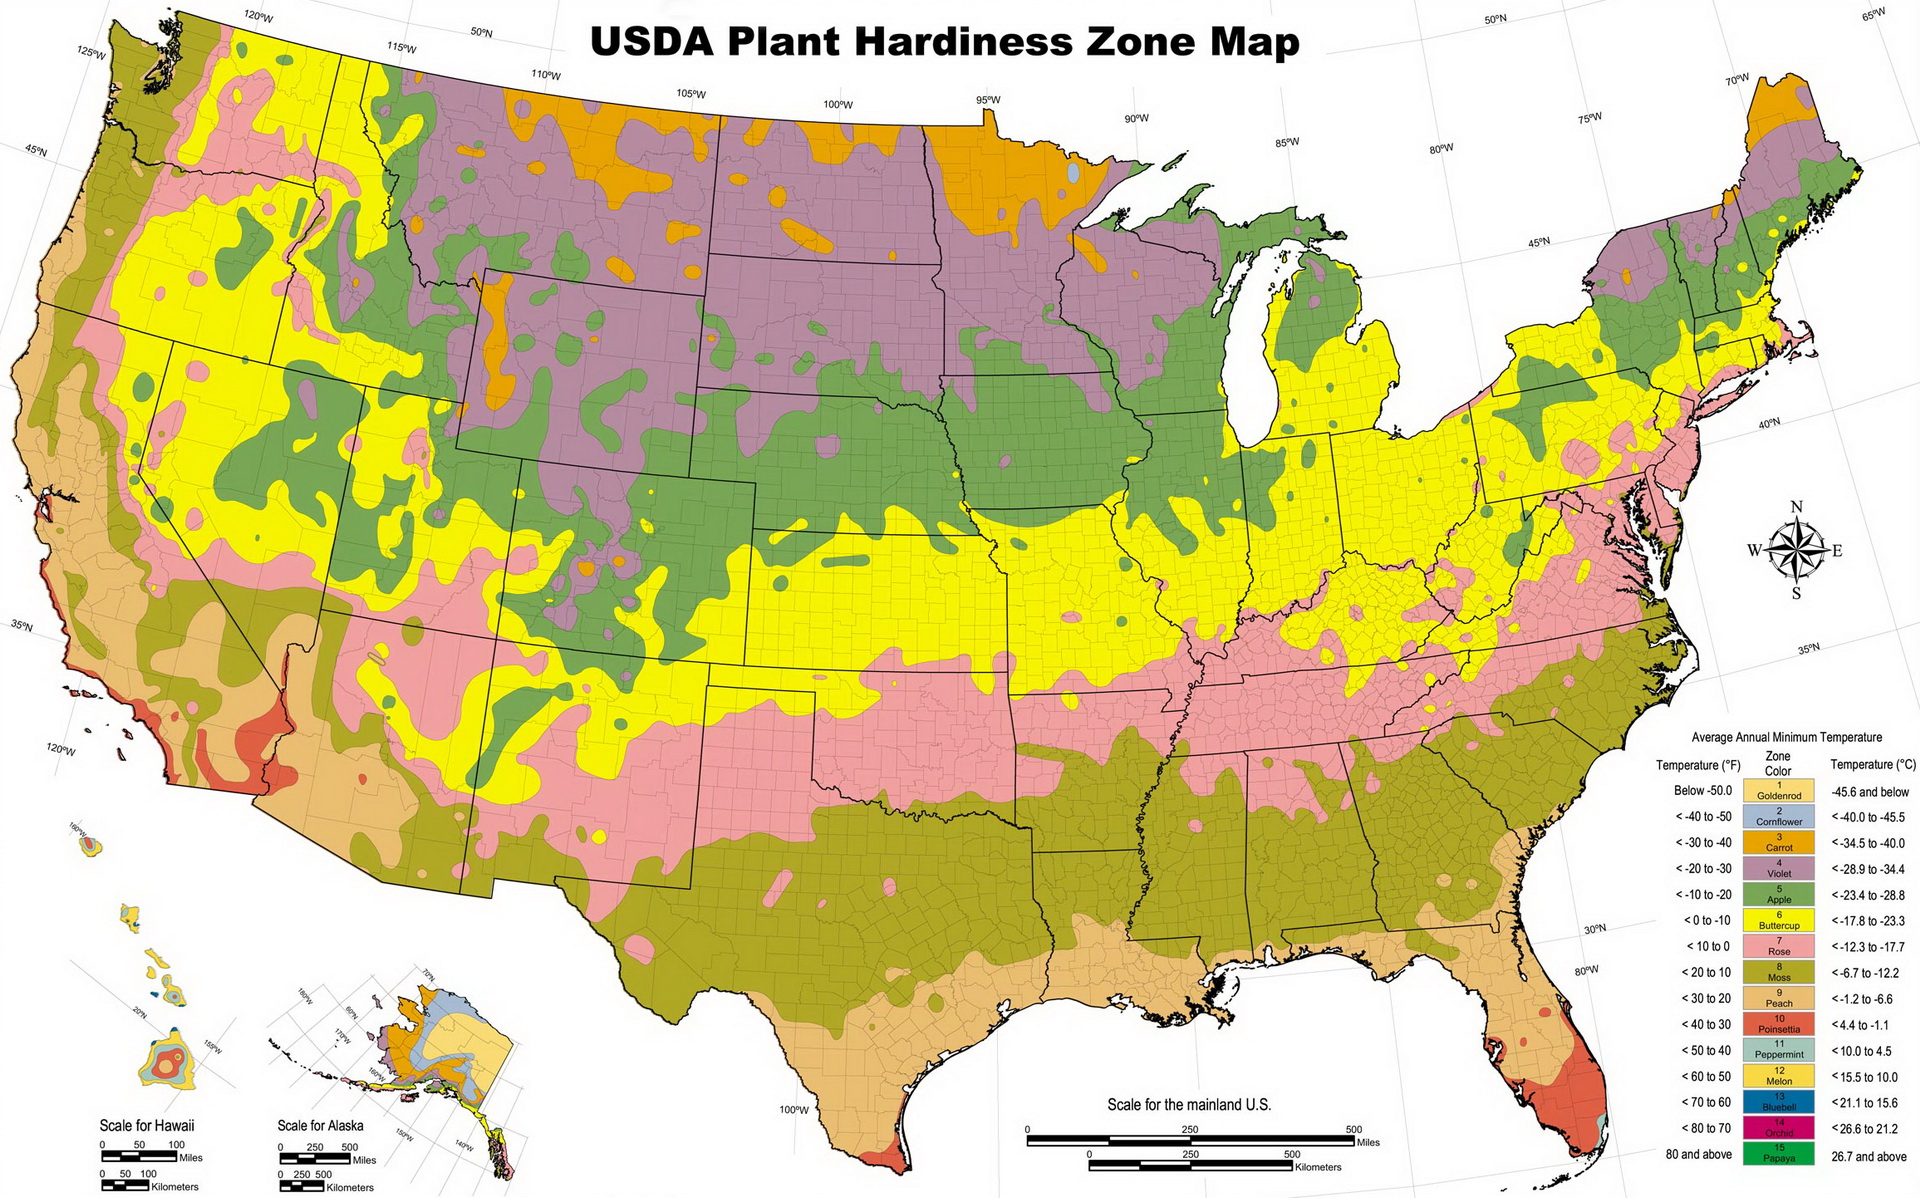 A USDA Hardiness Zone is a defined geographical area where a specific categ...